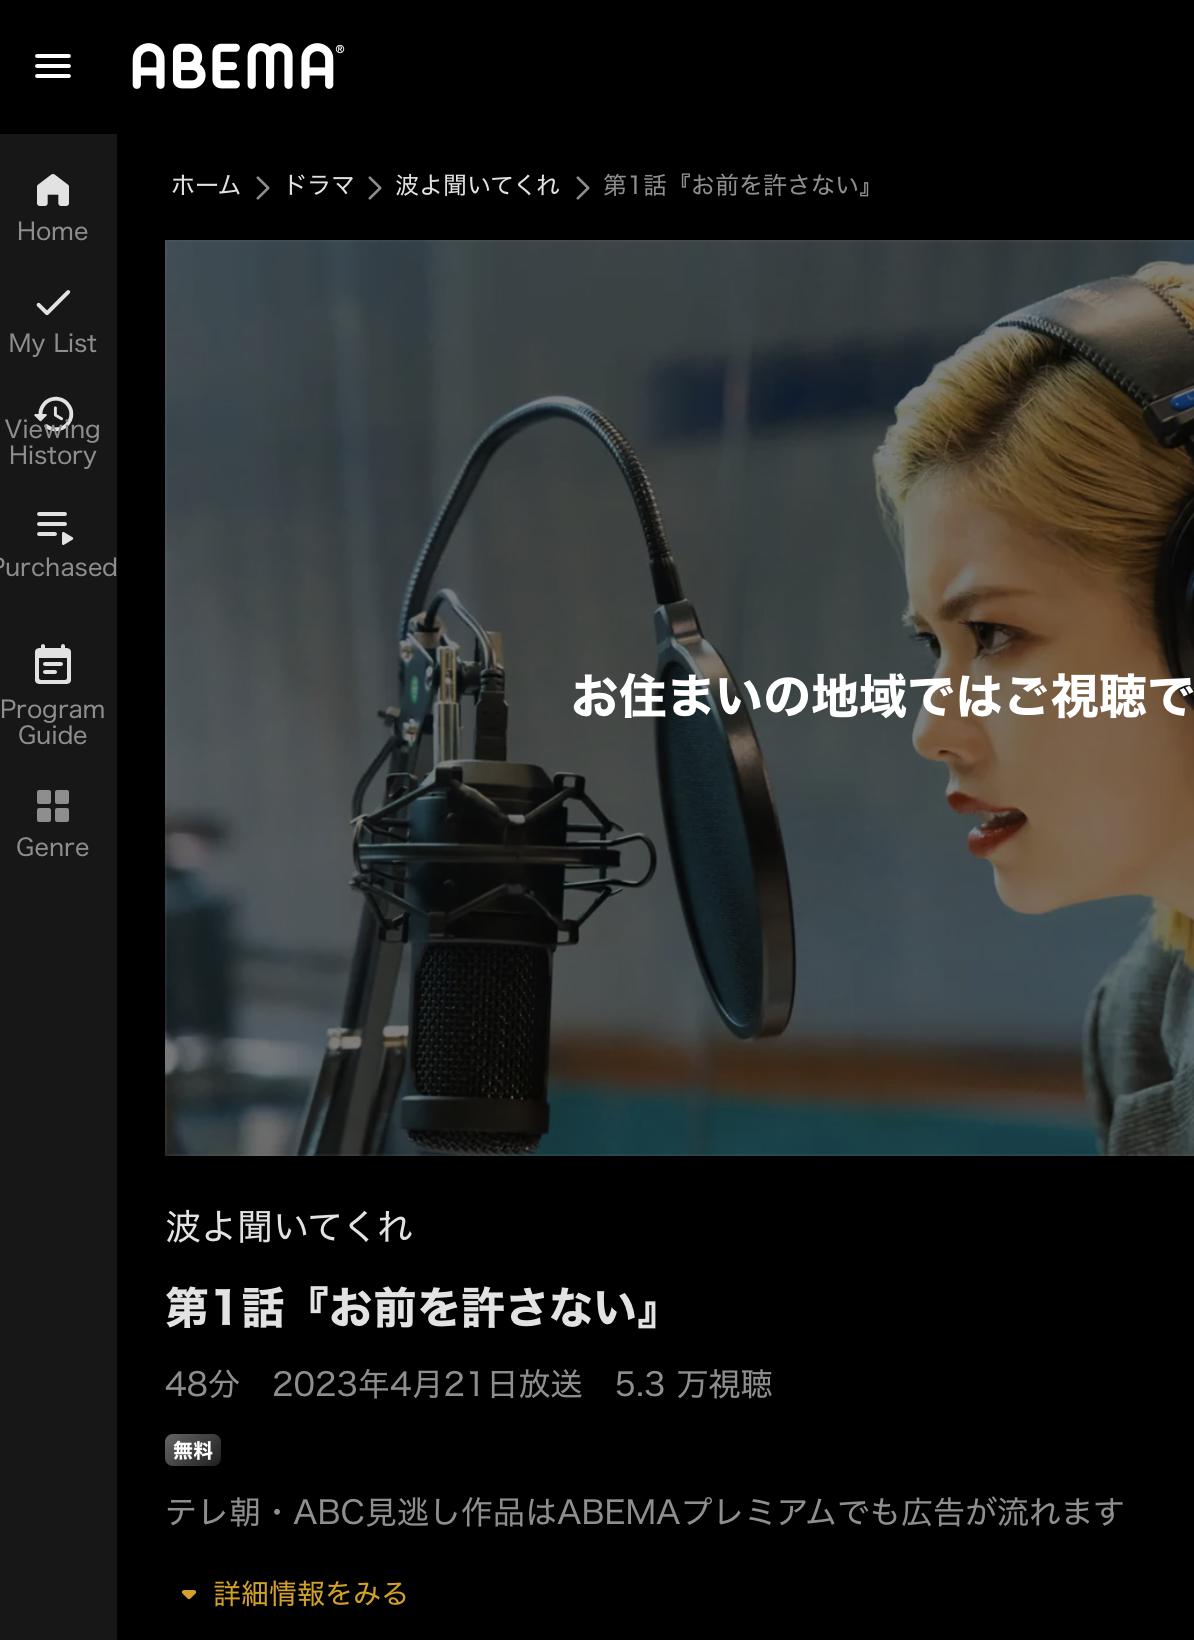 Japanese Dramas and the Streaming Success Story That Wasn’t: How Industry Practices and IP Shape Japan’s Access to Global Streaming